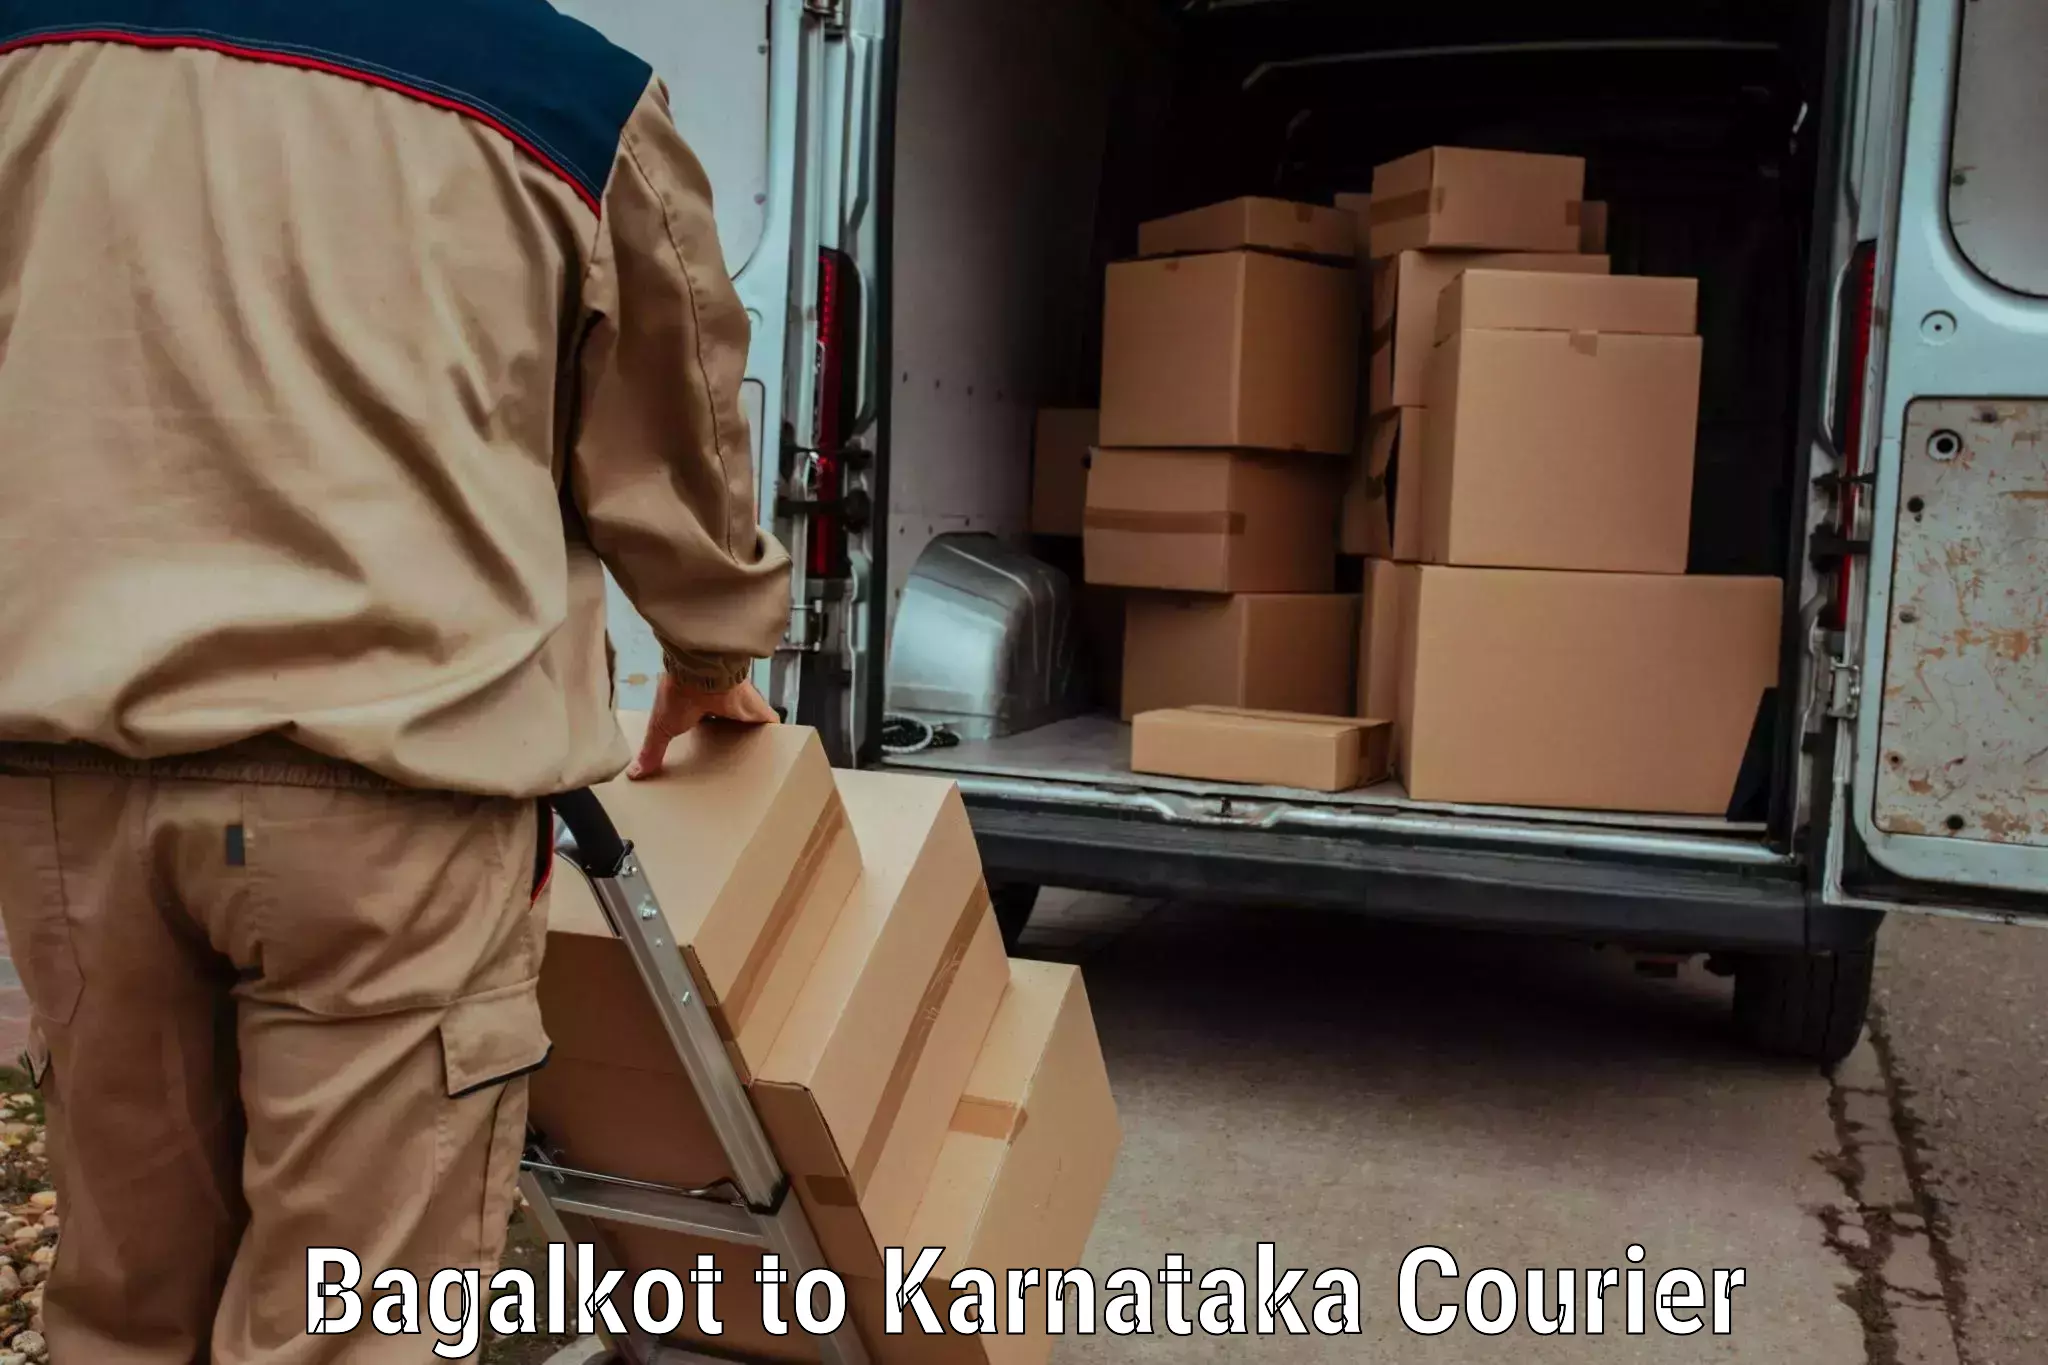 Quick dispatch service in Bagalkot to Yadgir